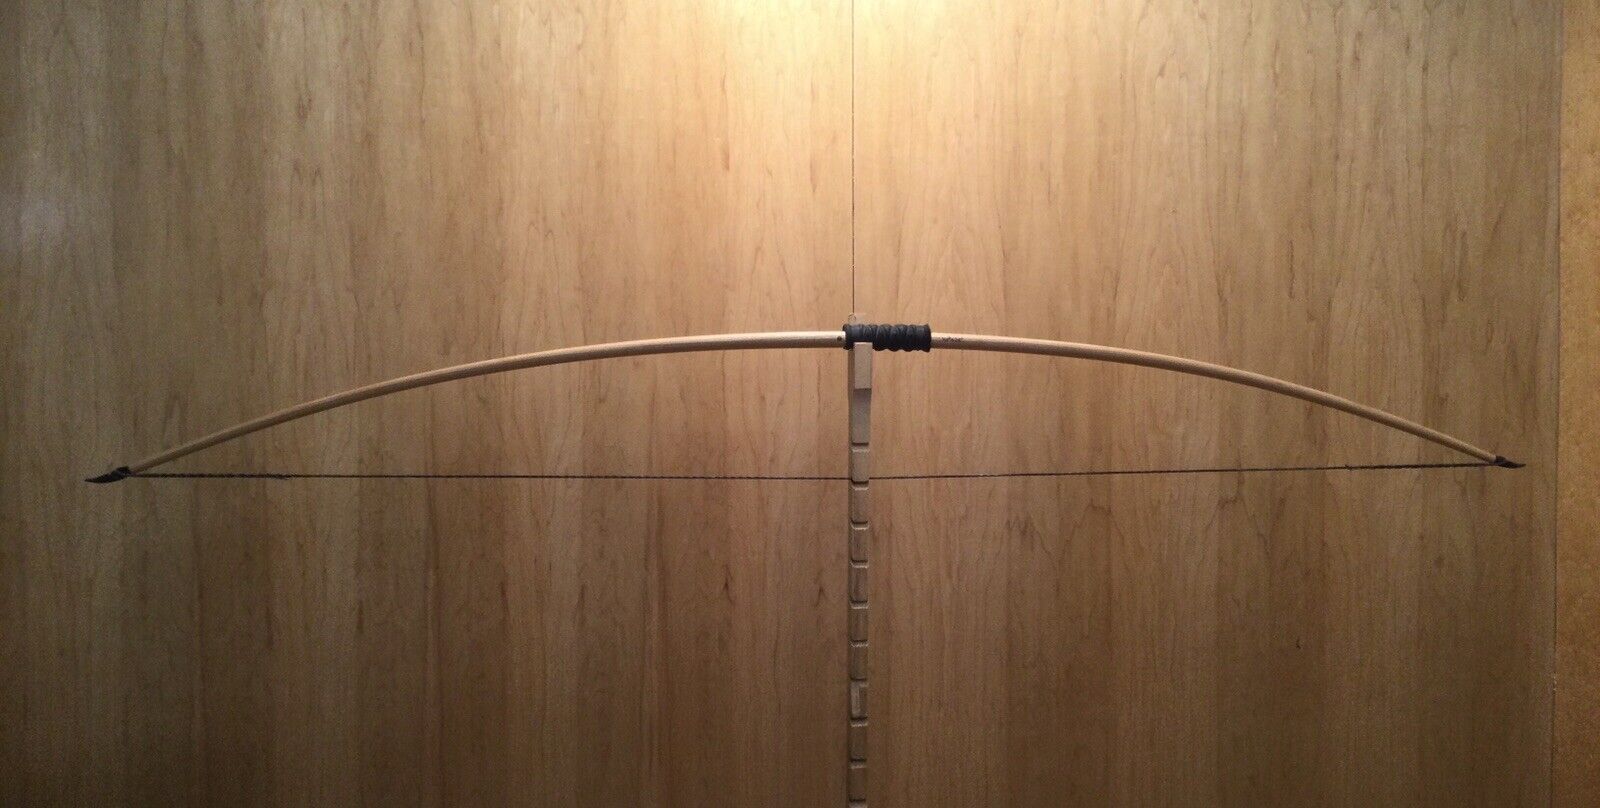 English Longbow “Selfbow” 40#@28” 72” Overall